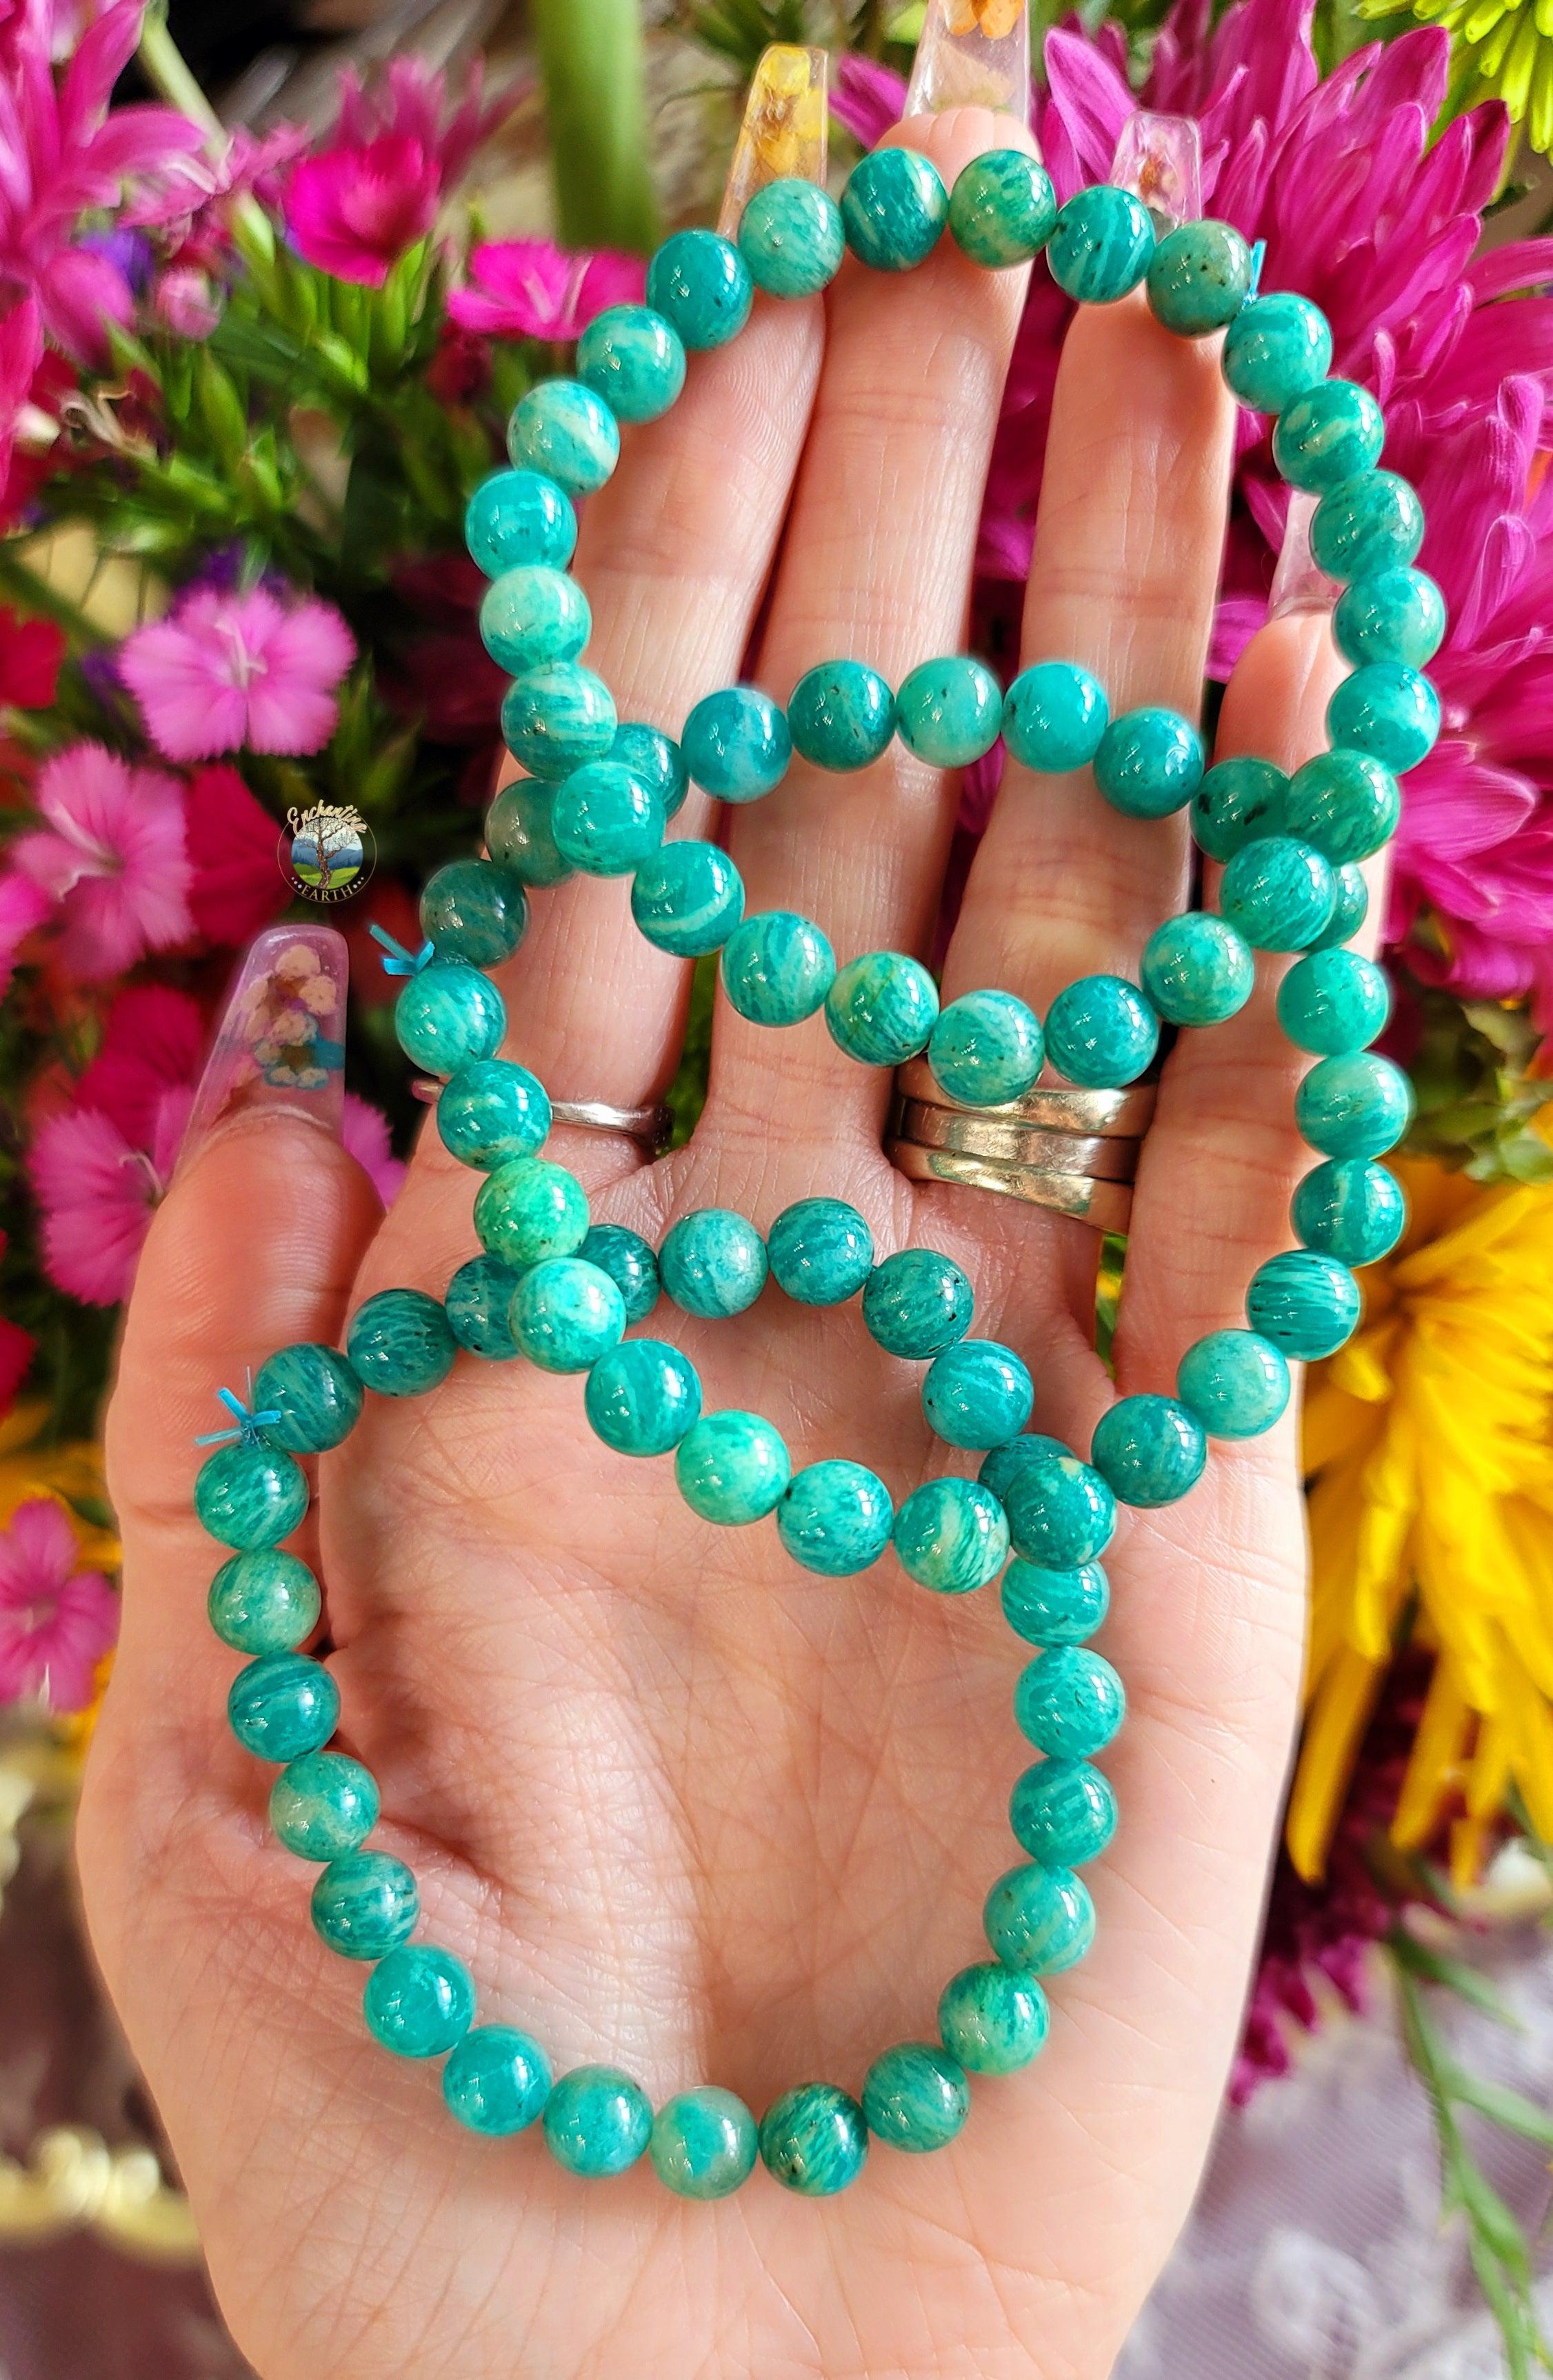 Russian Amazonite Bracelet for Speaking Your Truth